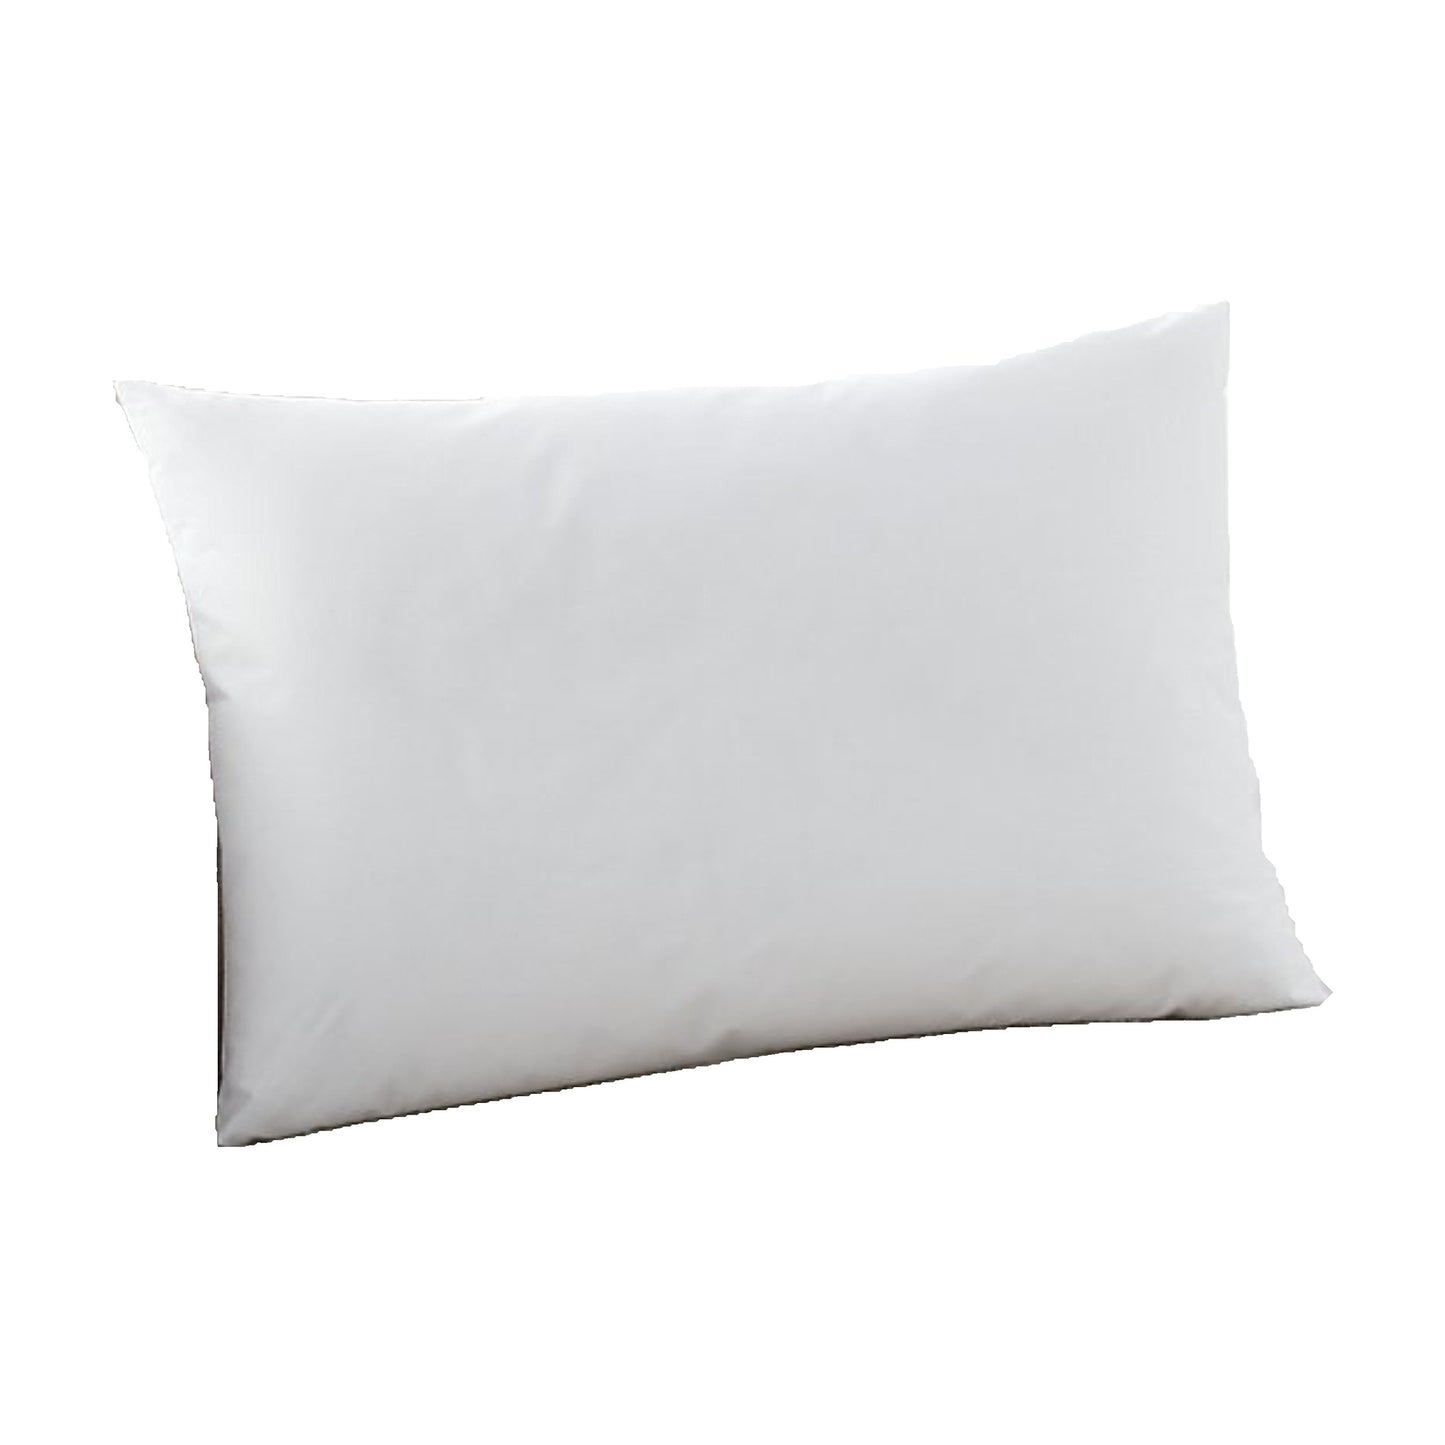 MoonRest Square Premium Hypoallergenic Polyester Microfiber Stuffer Pillow Insert Form for Decorative Throw Pillow, Cushion Cover with Hidden Zipper for Couch Bed Sofa, Solid Soft